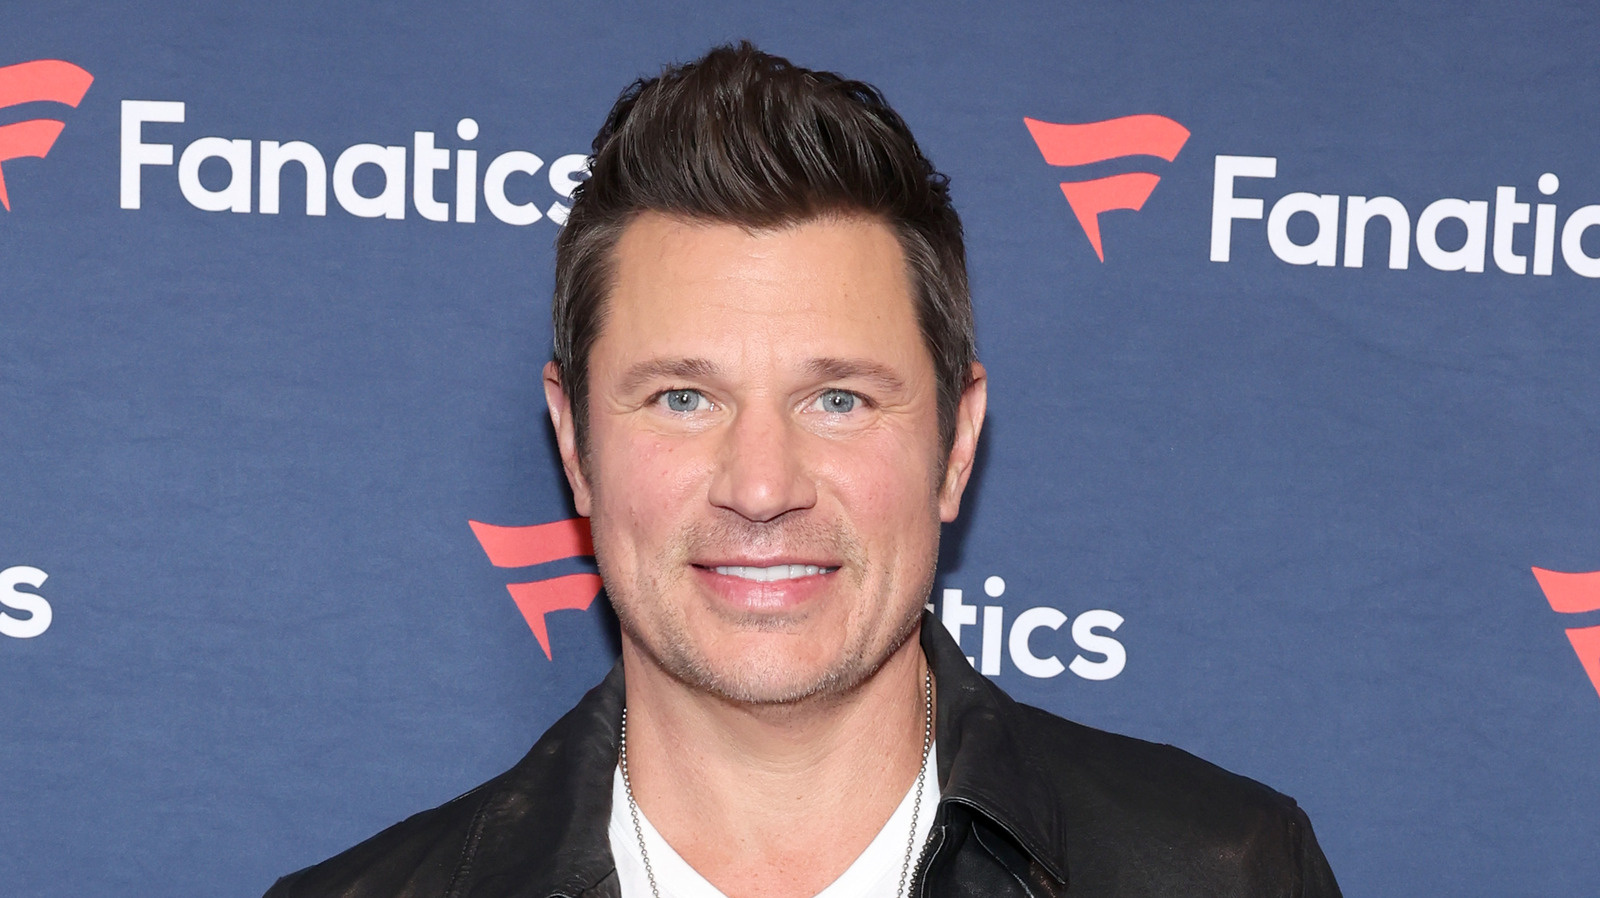 Drew Lachey, Nick Lachey, Justin Jeffre and Jeff Timmons autograph News  Photo - Getty Images